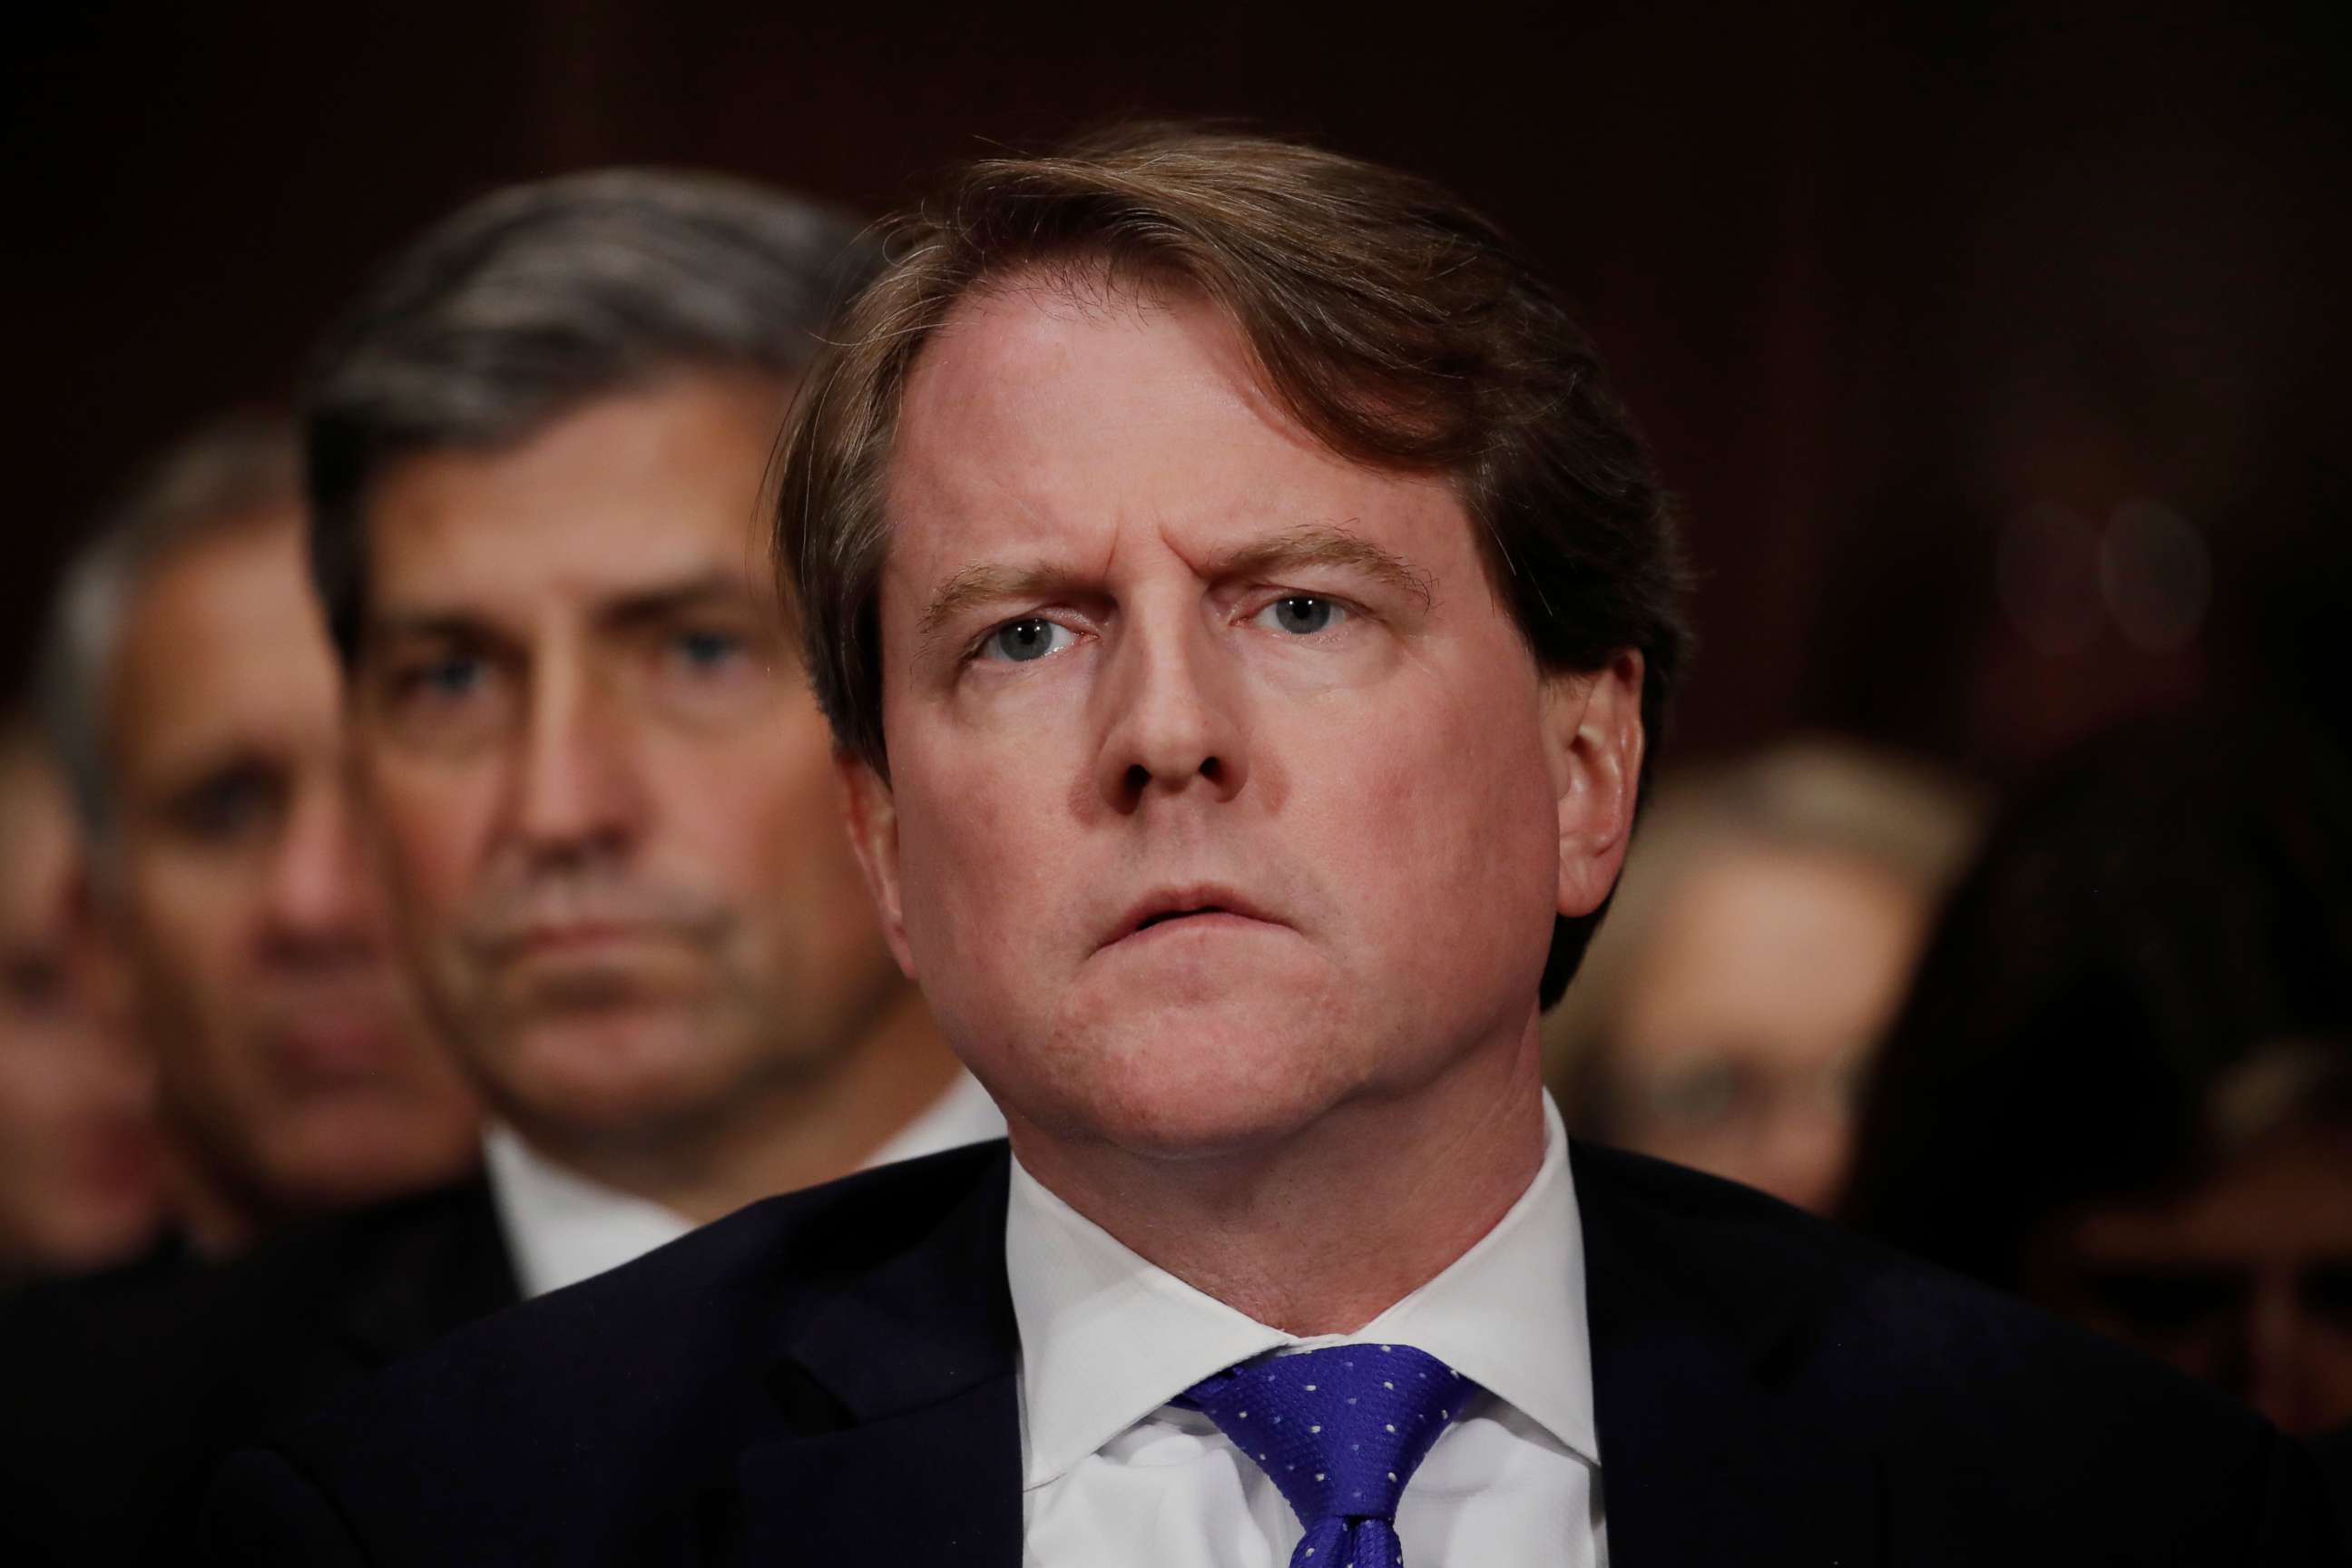 PHOTO: White House counsel Don Mcgahn listens to Judge Brett Kavanaugh testify before the Senate Judiciary Committee during his Supreme Court confirmation hearing in the Dirksen Senate Office Building on Capitol Hill, Sept. 27, 2018, in Washington.